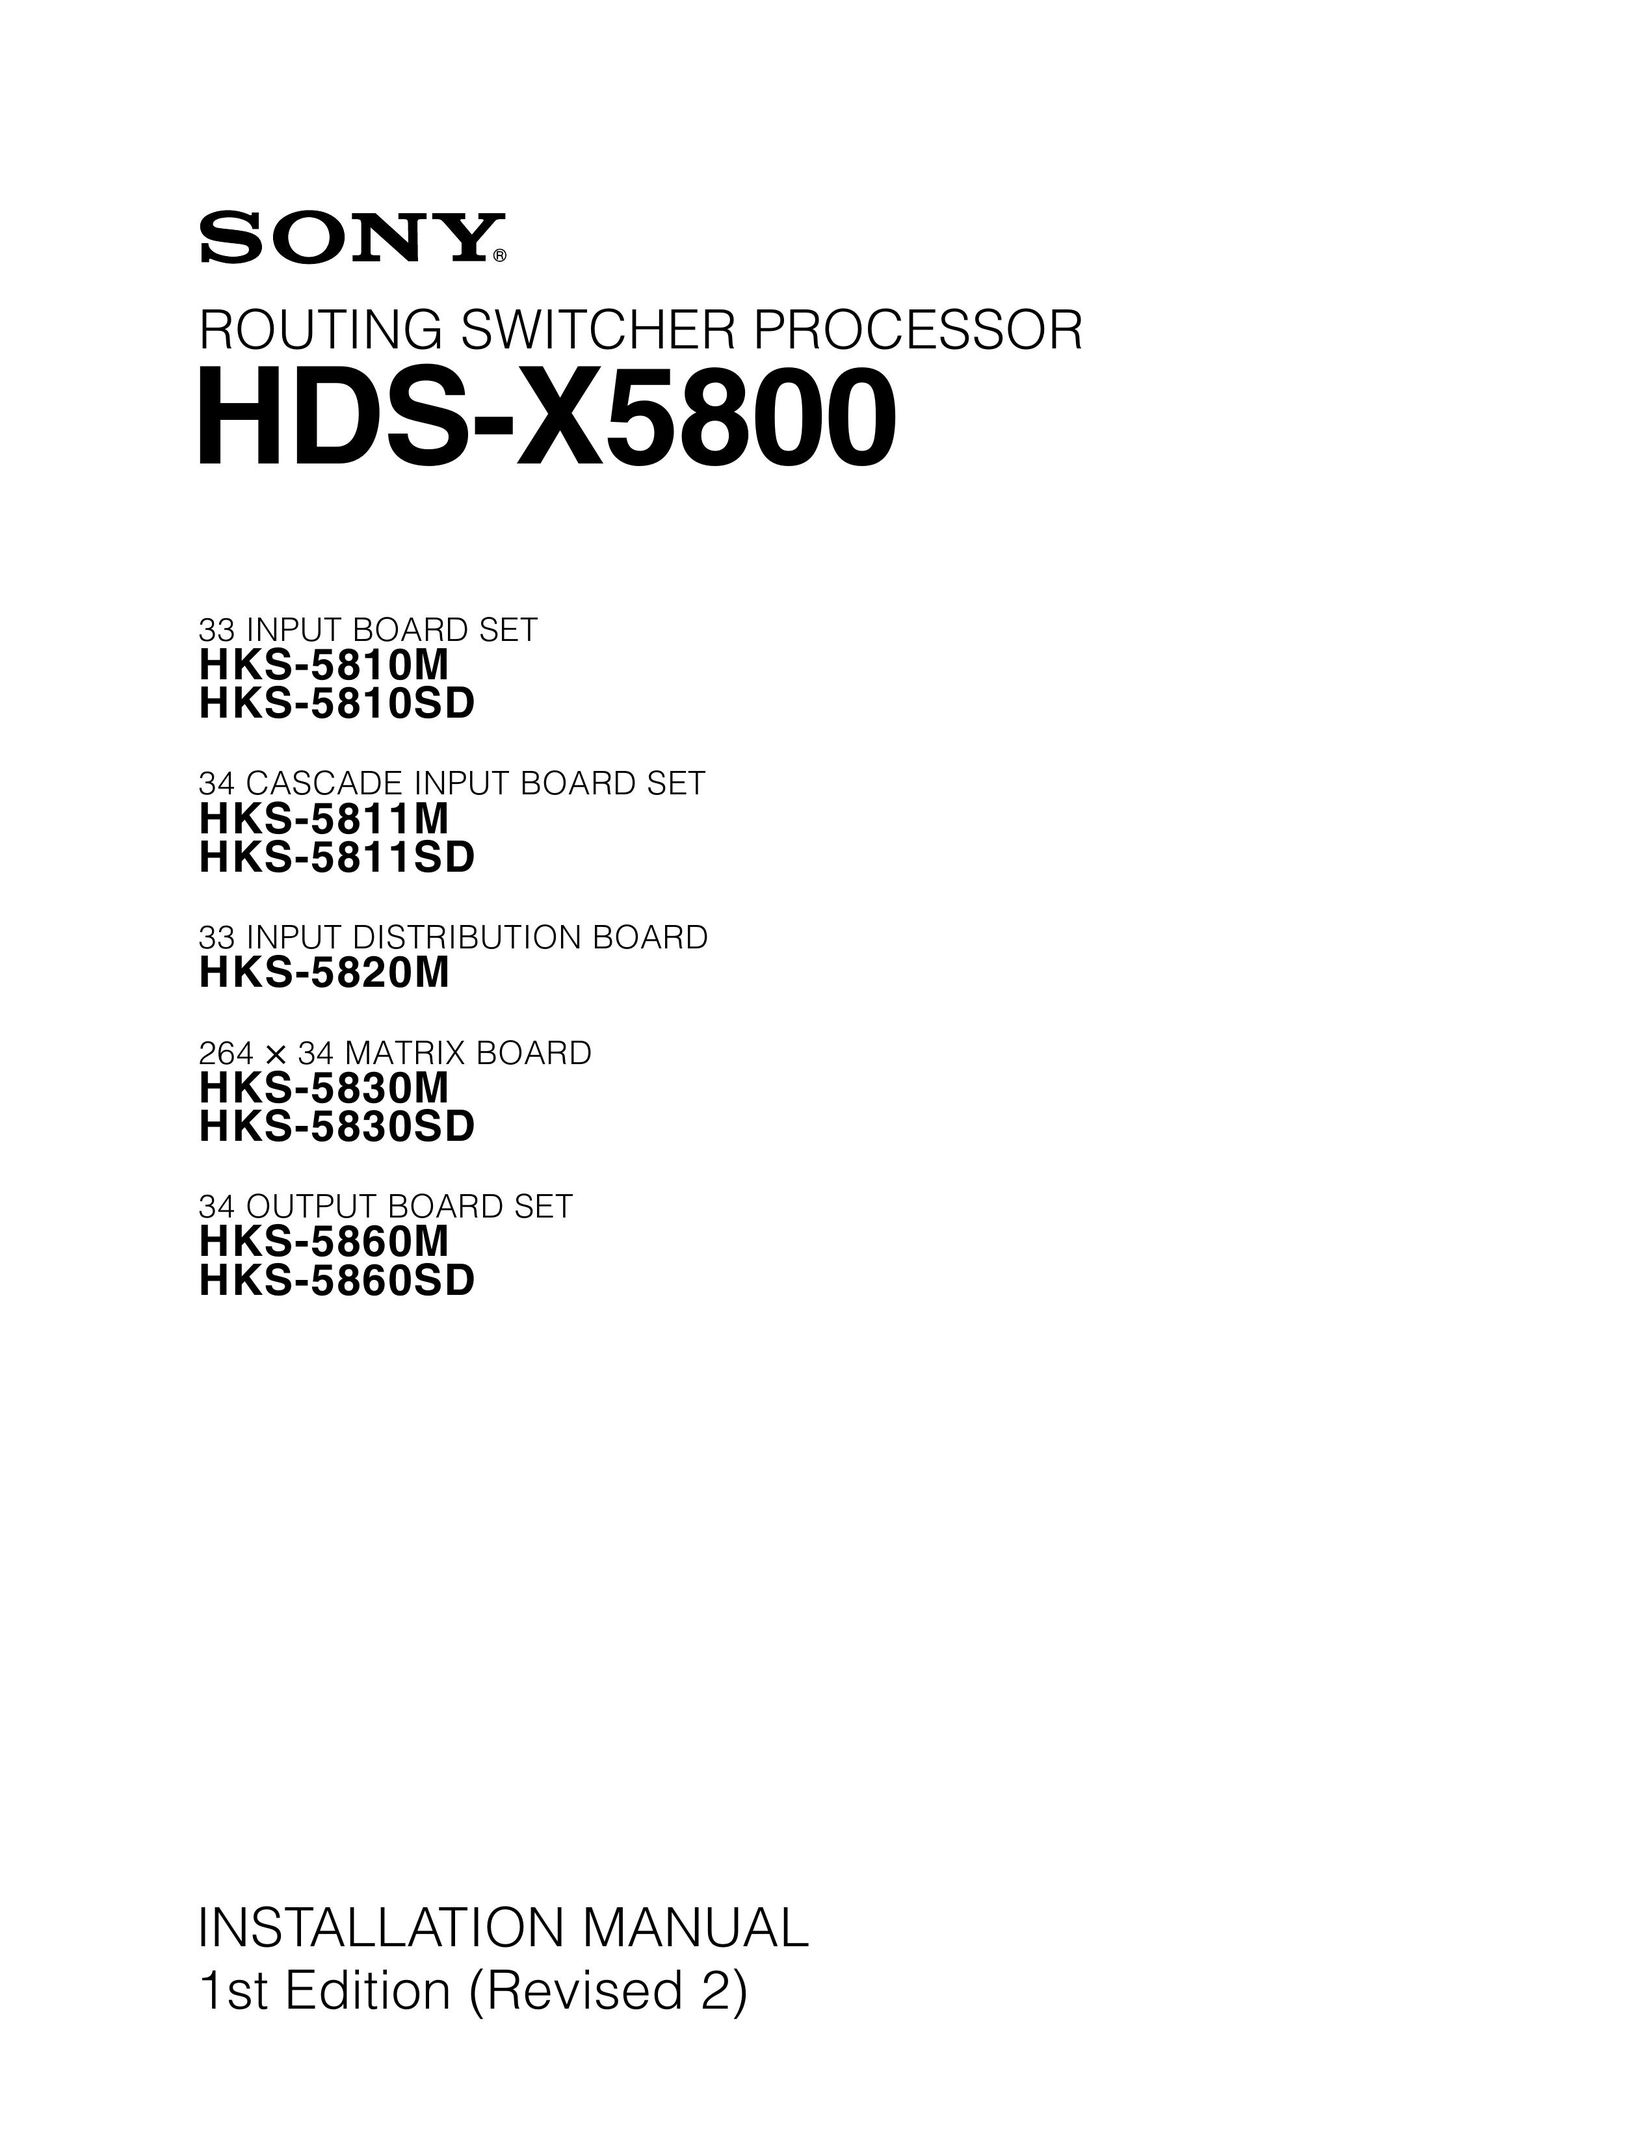 Sony HDS-X5800 Network Router User Manual